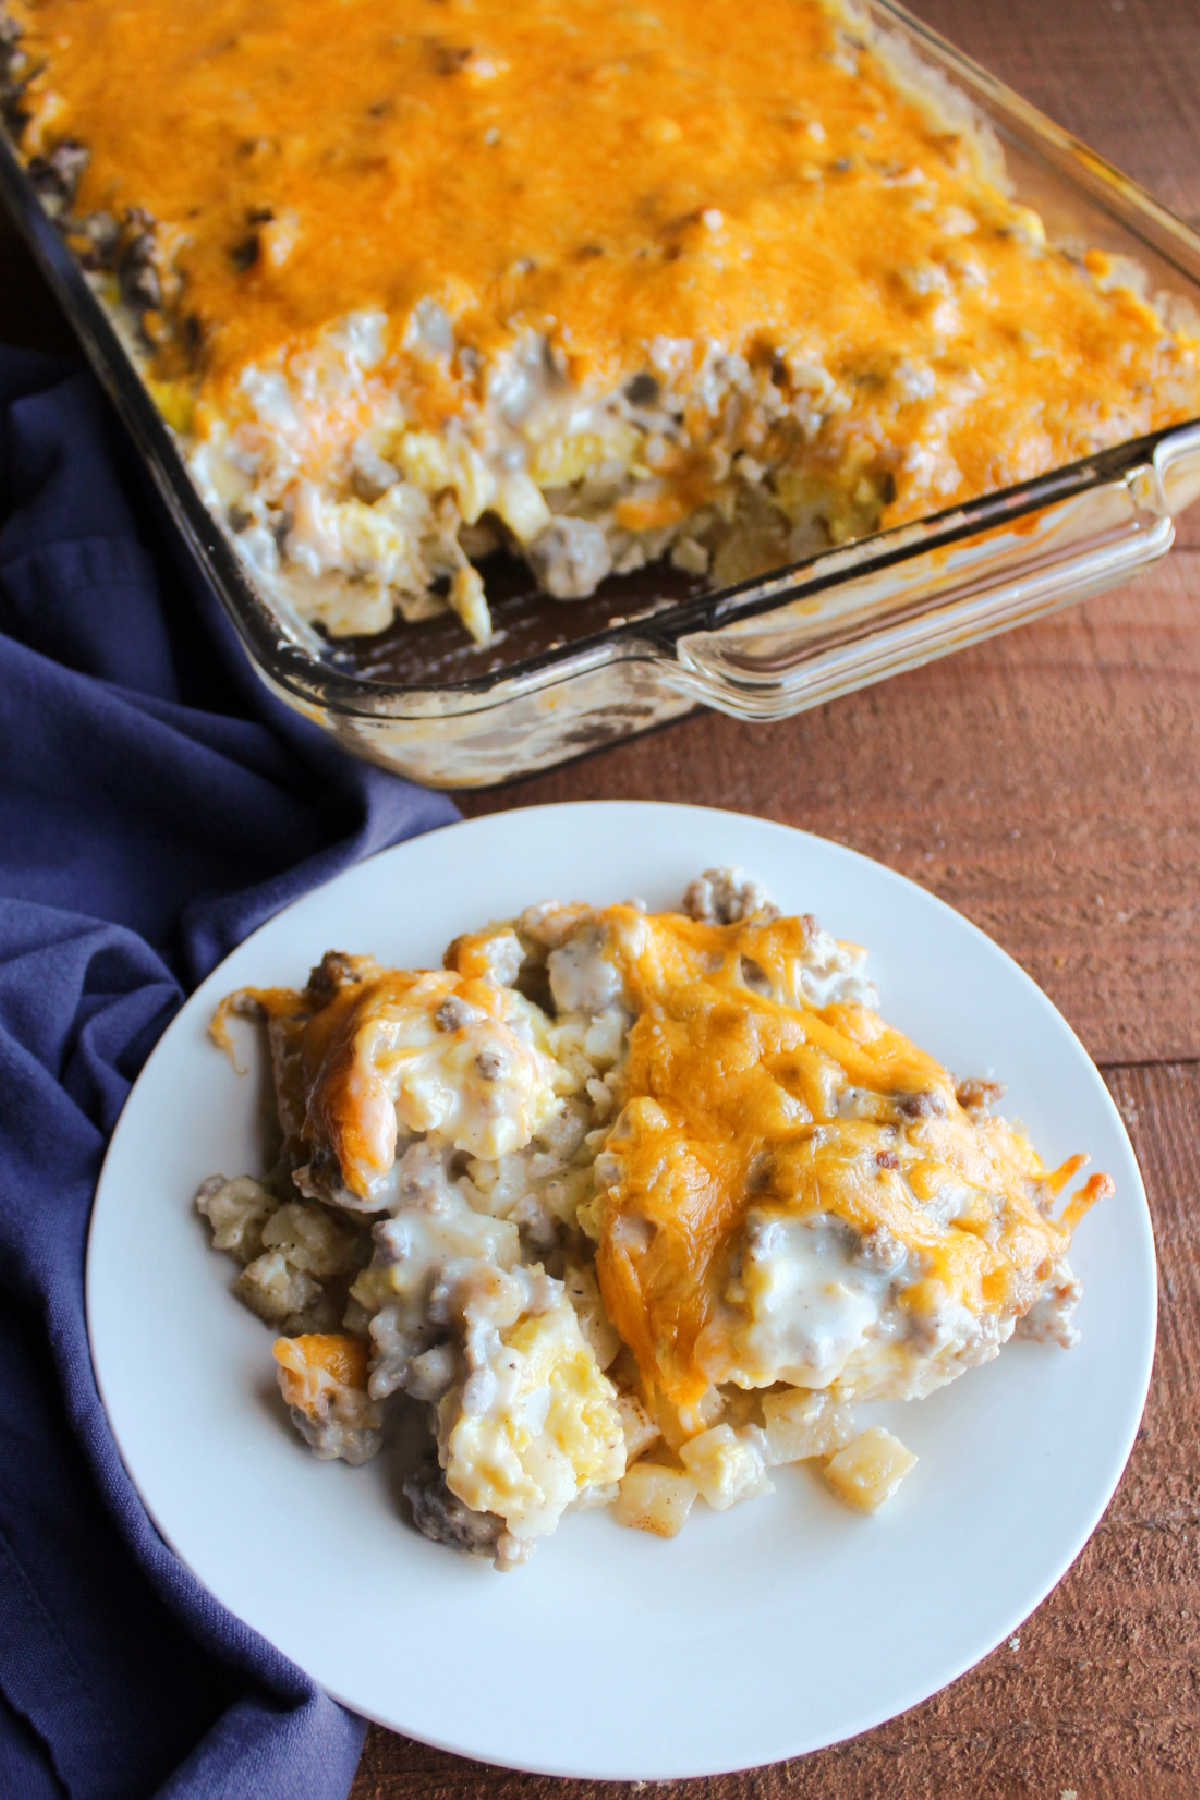 Serving of breakfast casserole with hash browns, eggs, sausage gravy and cheese on plate with remaining casserole in pan behind it.